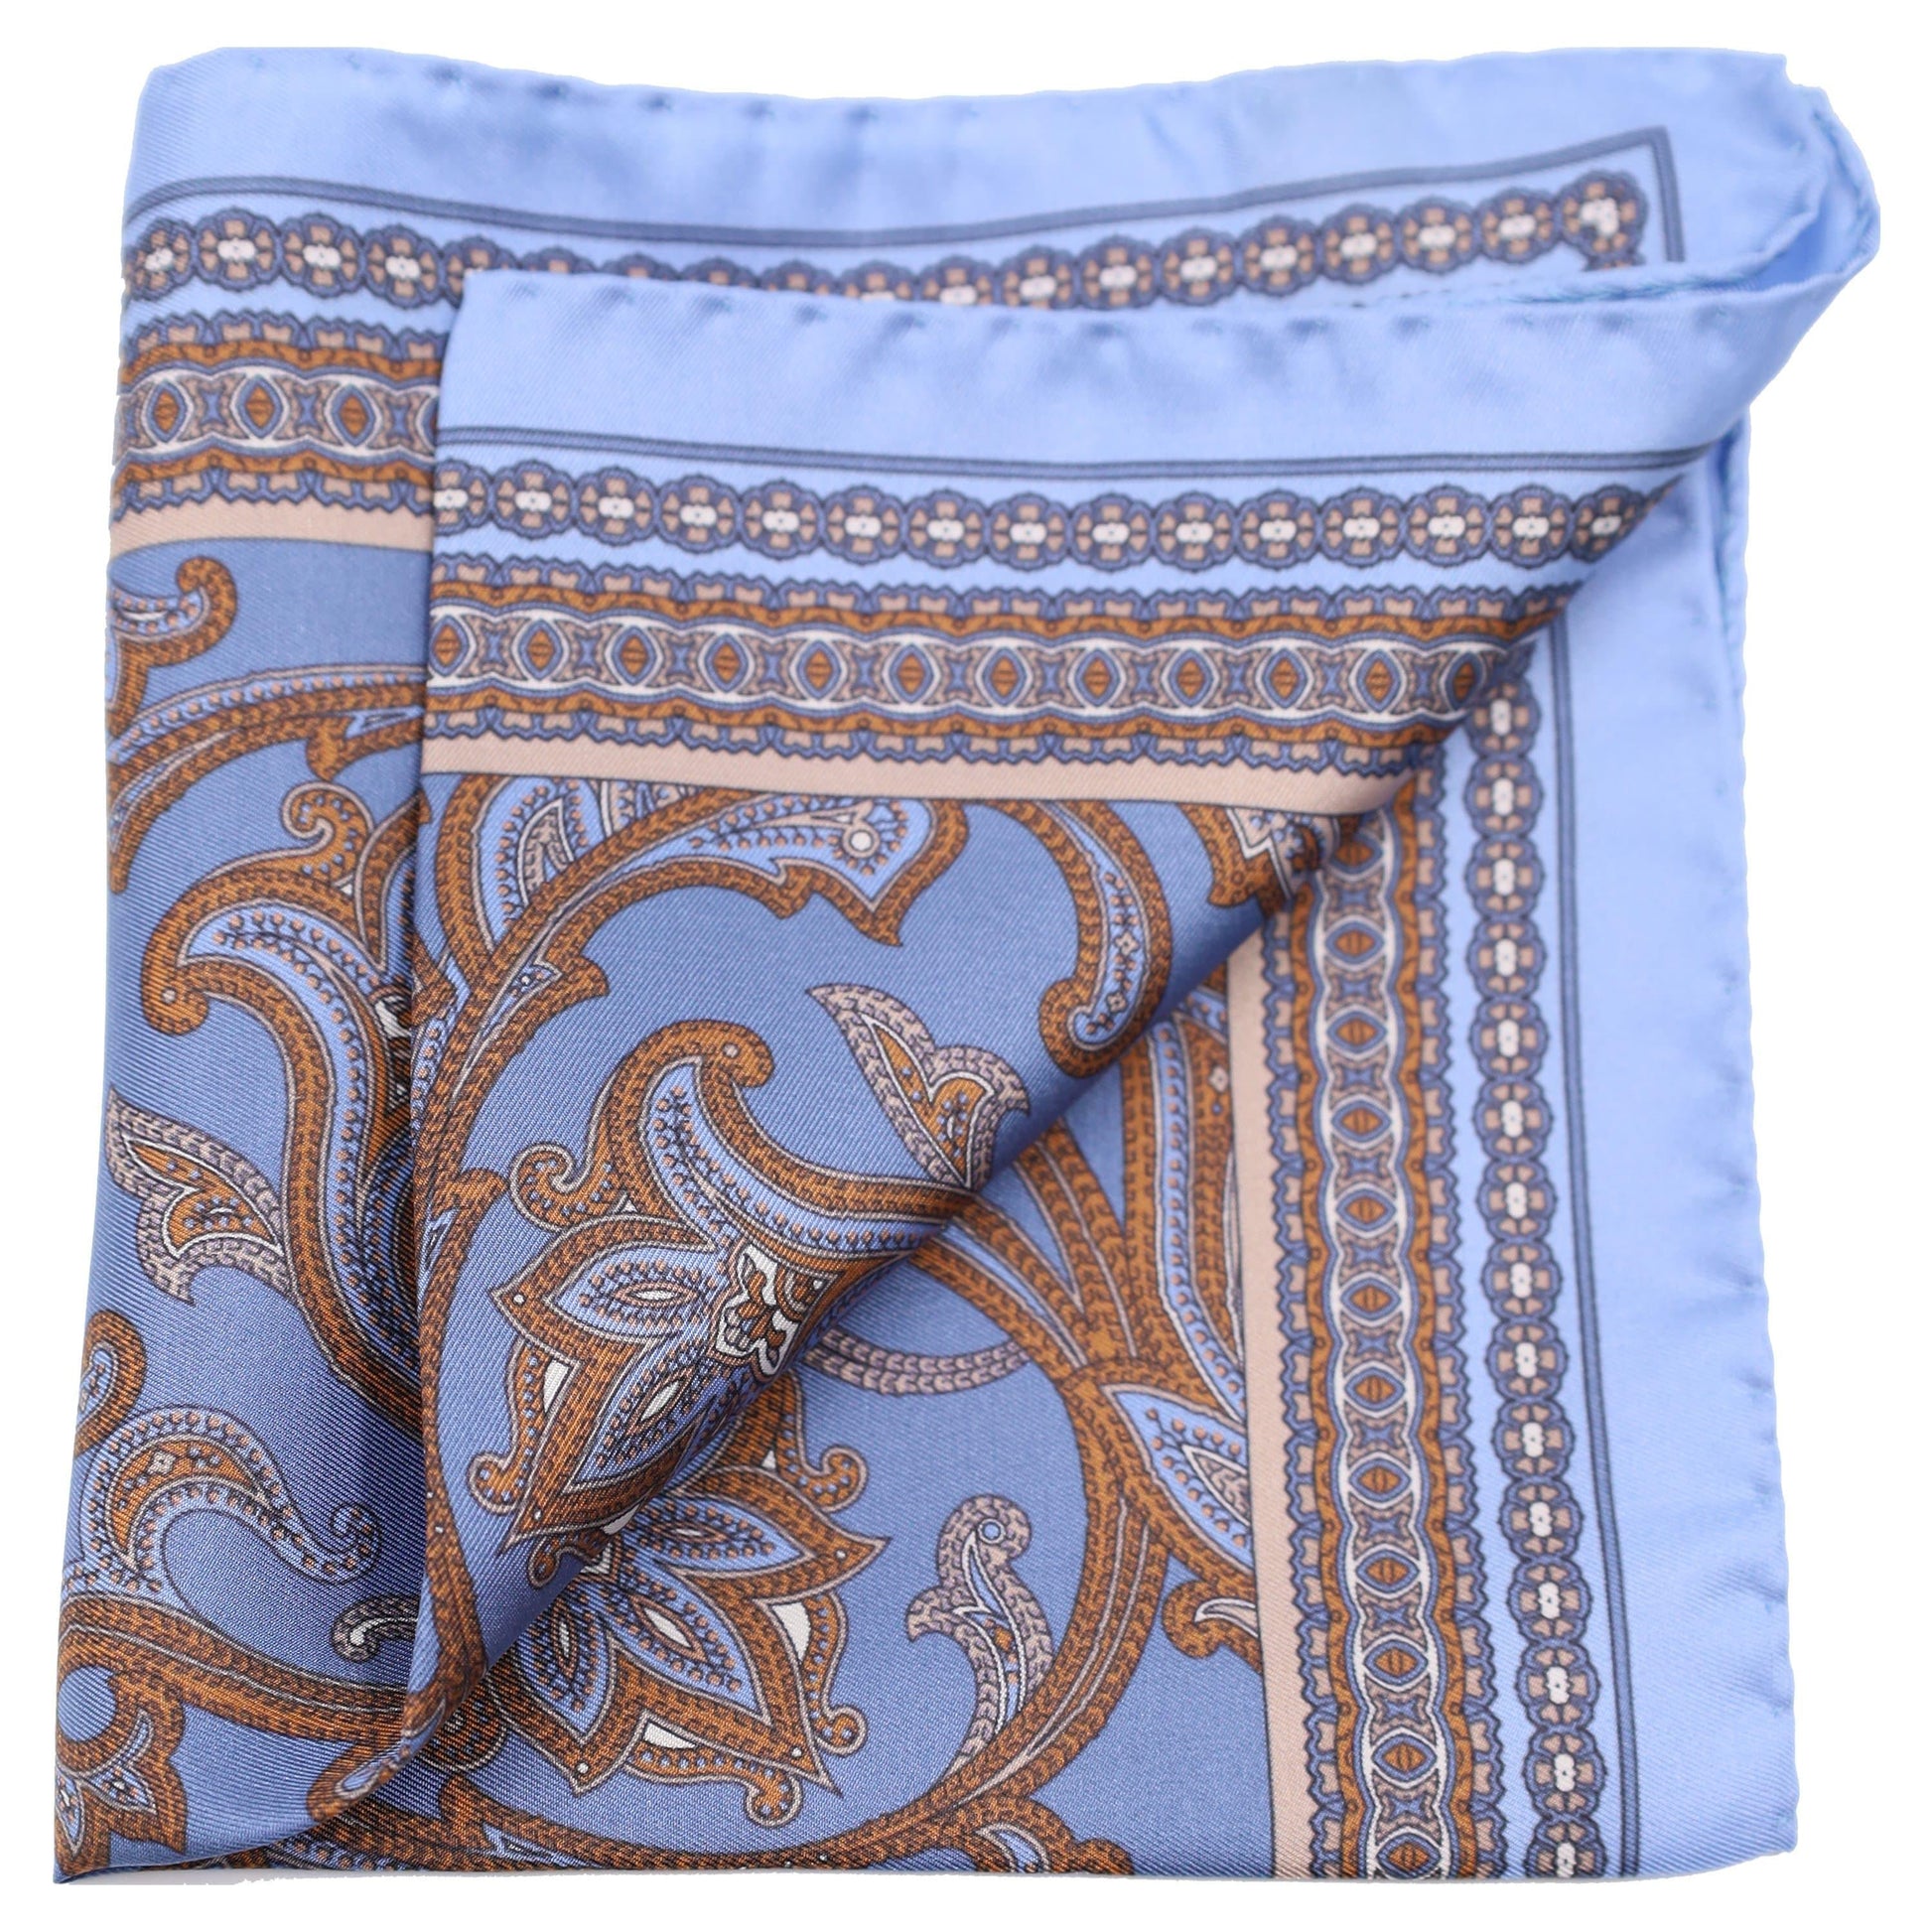 Sky with Brown Paisley Silk Pocket Square - Just White Shirts